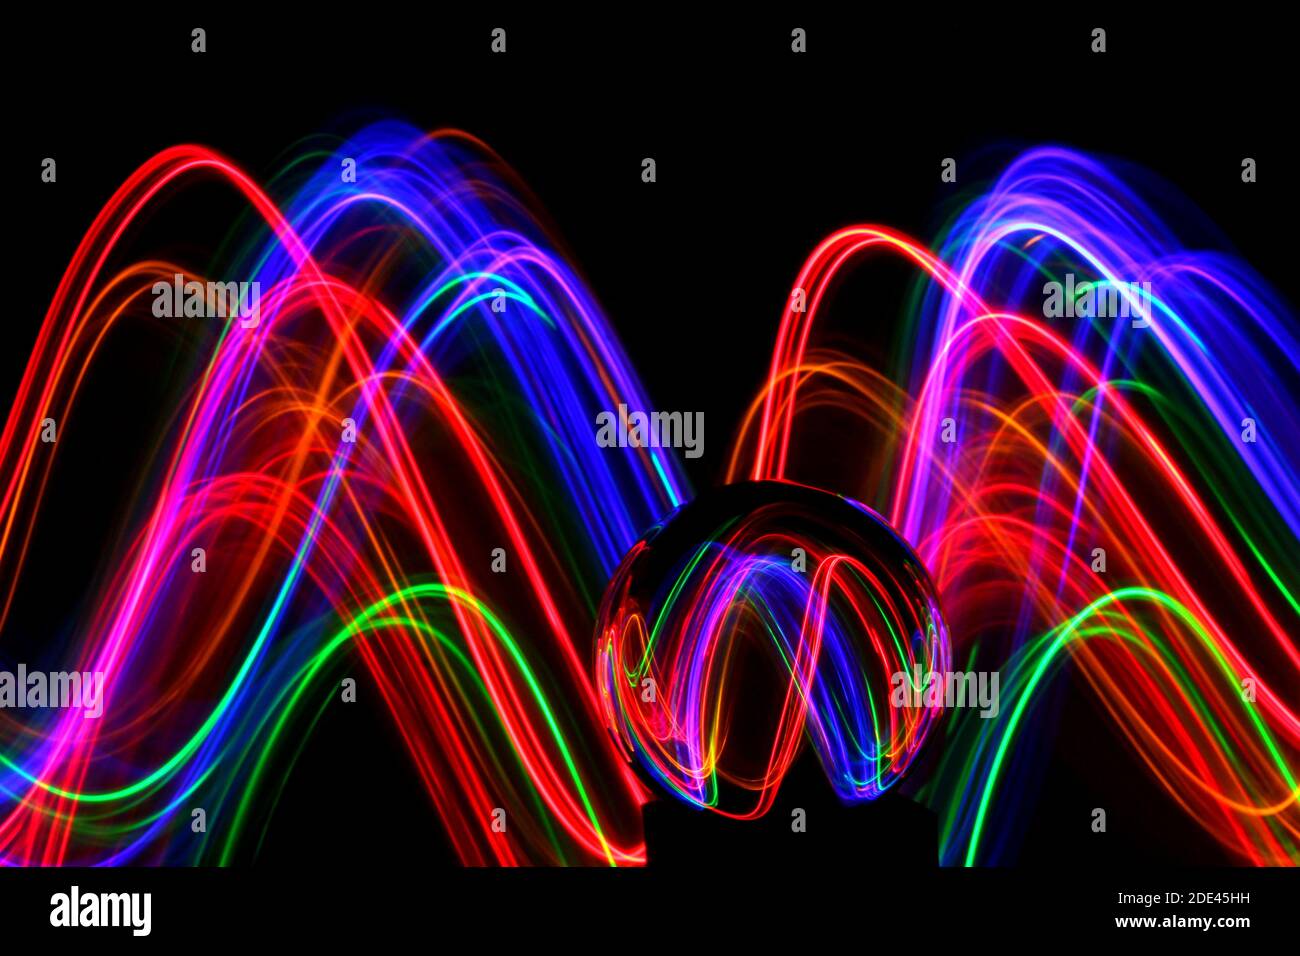 Long exposure photograph of neon multi colour in an abstract swirl pattern with reflective glass ball. Light painting photography. Stock Photo